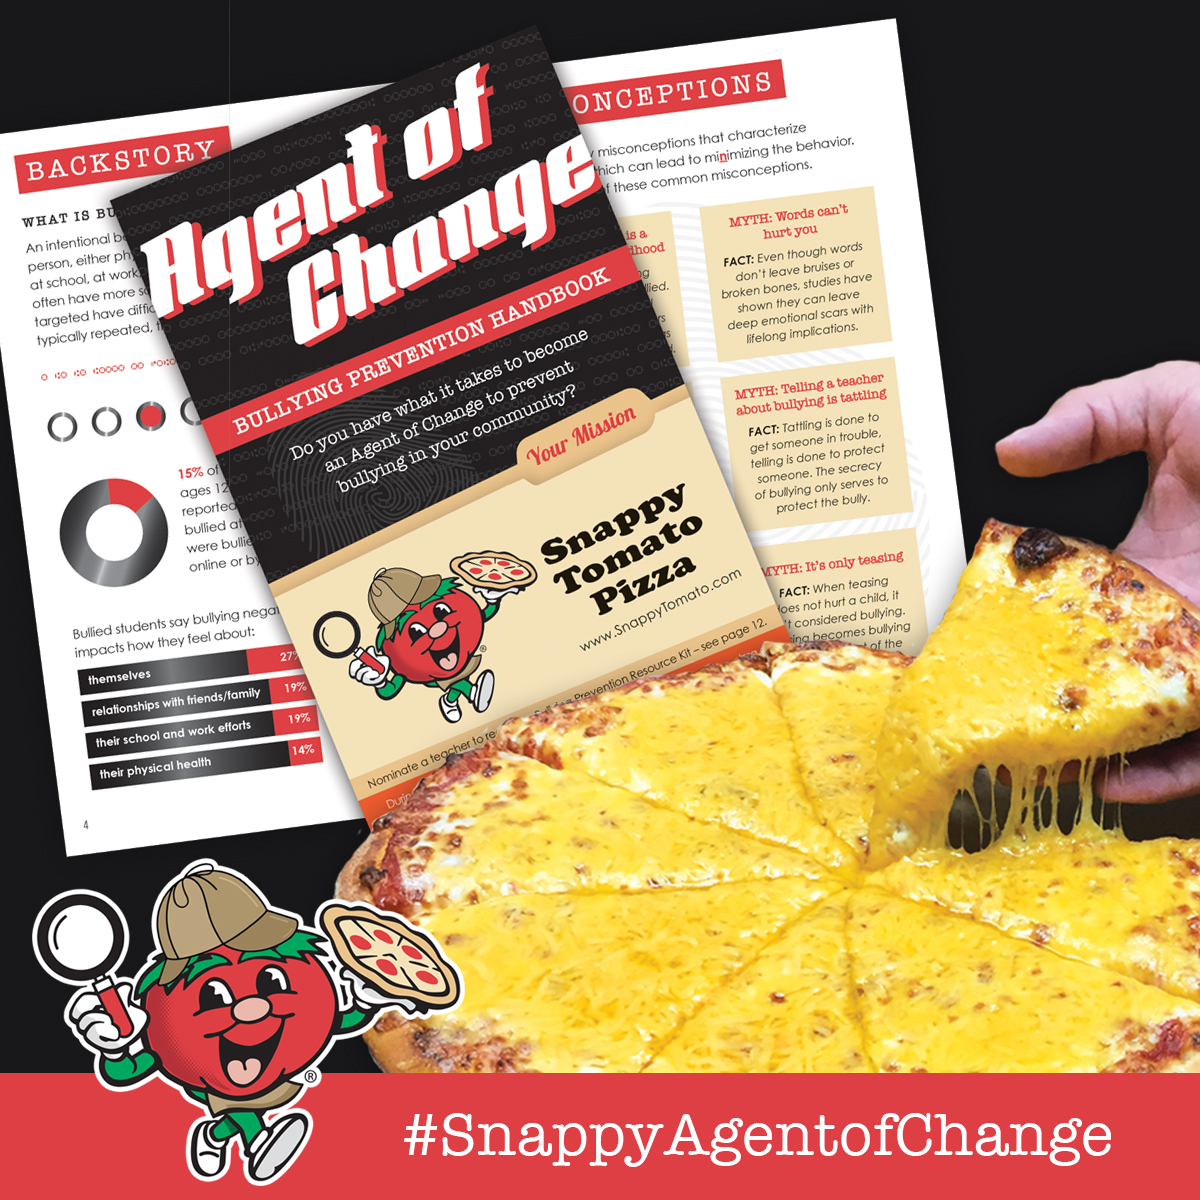 Image Two – Agent of Change Handbook – Snappy Tomato Pizza
Get your free Agent of Change Handbook with your Snappy Tomato order to learn how you can help prevent bullying in your community.  During the month of October Snappy Tomato Pizza will be distributing these Agent of Change Handbooks to prevent bullying with every carry out, deliver or pick-up order.  Become a #SnappyAgentofChange today!  Visit SnappyTomato.com/UnityPizza for more information. 
#SnappyTomato  #SnappyAgentofChange  #AgentofChangeEducator
